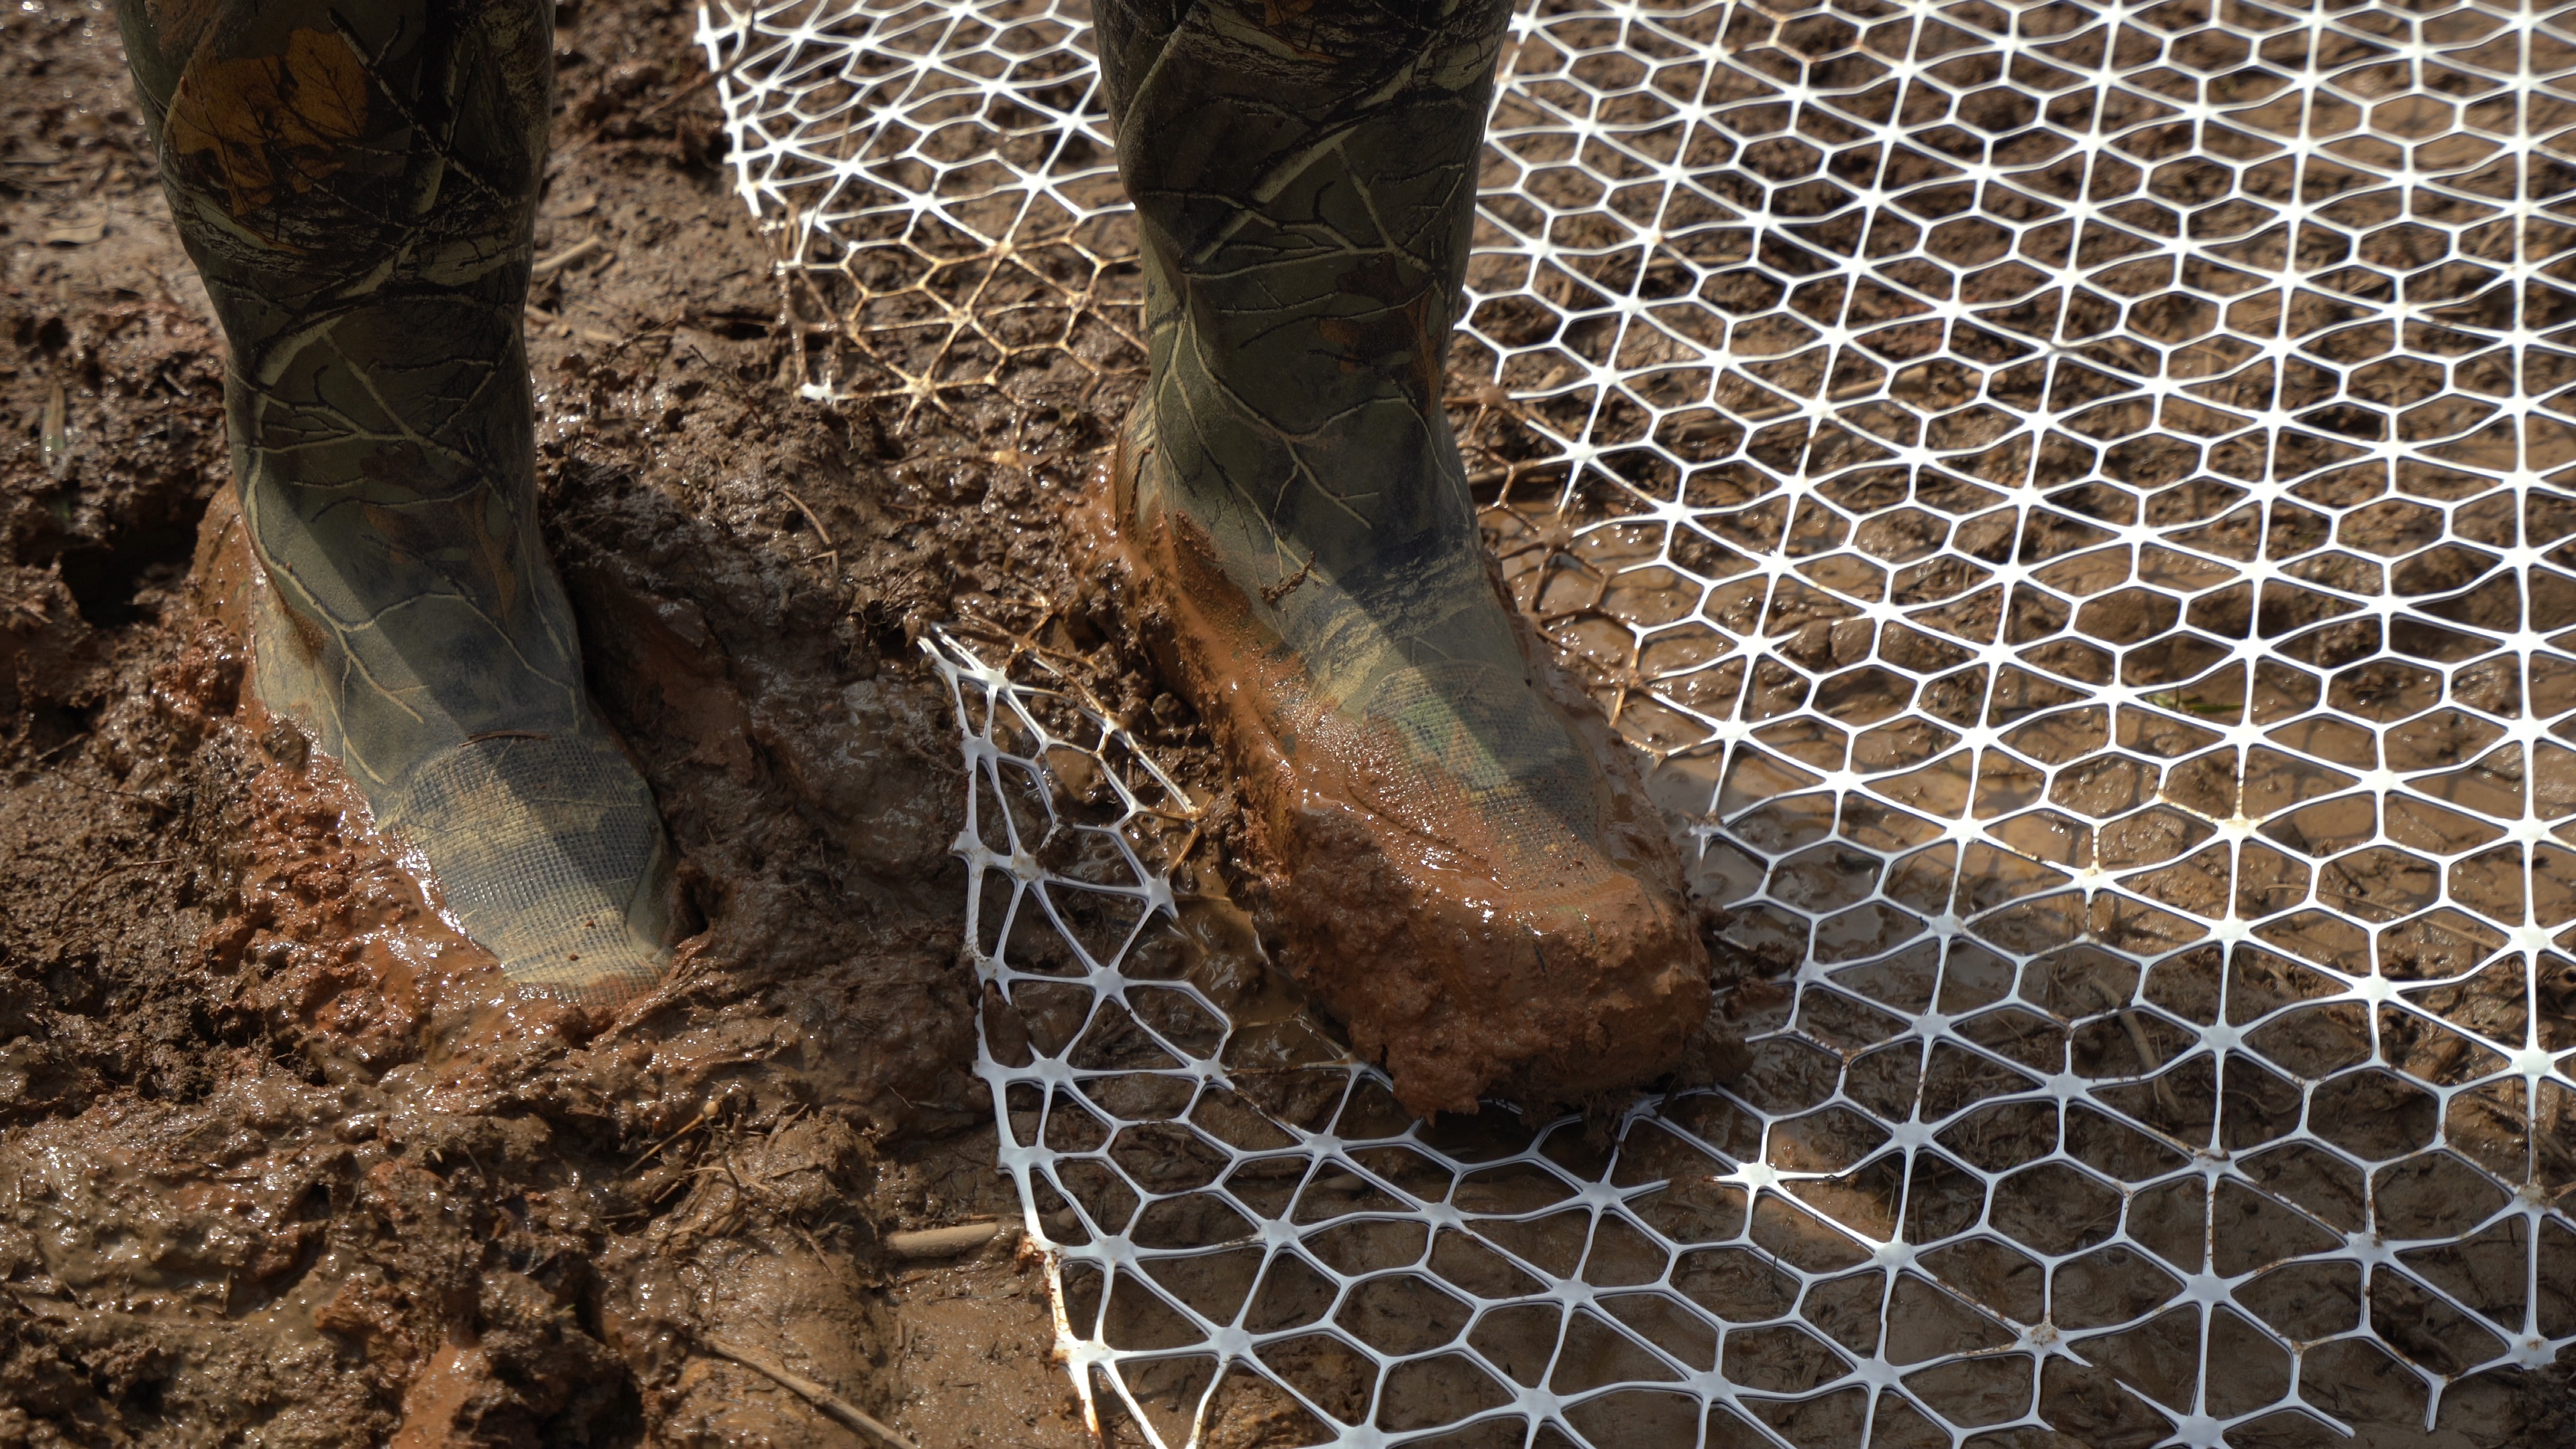 V. Understanding Hens and their Impact on Soil Compaction